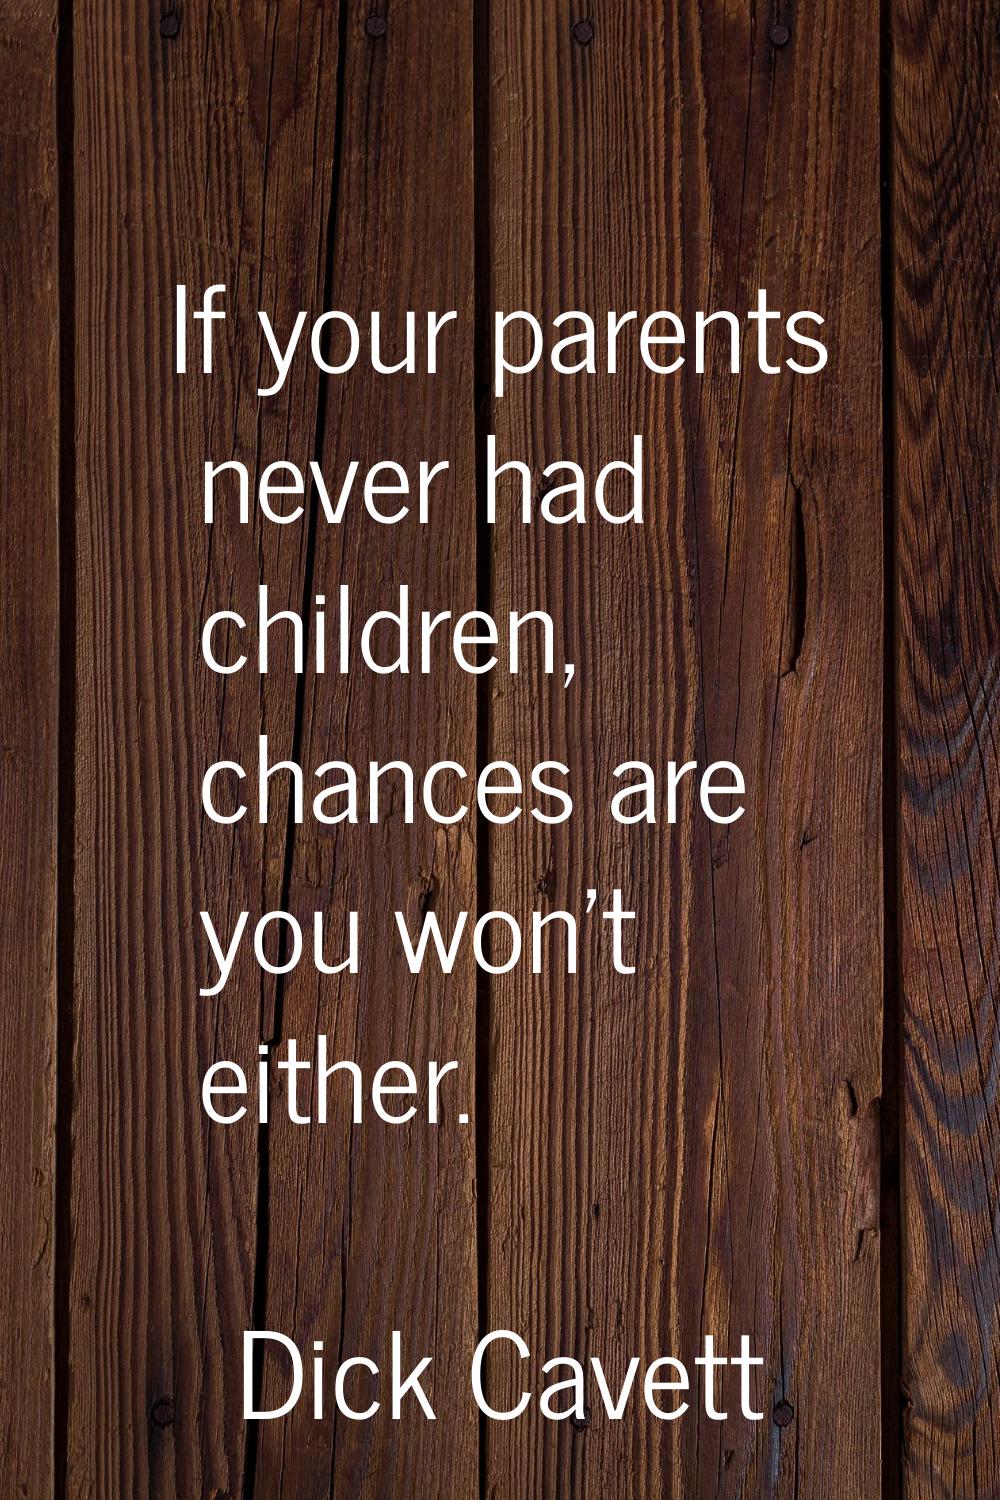 If your parents never had children, chances are you won't either.